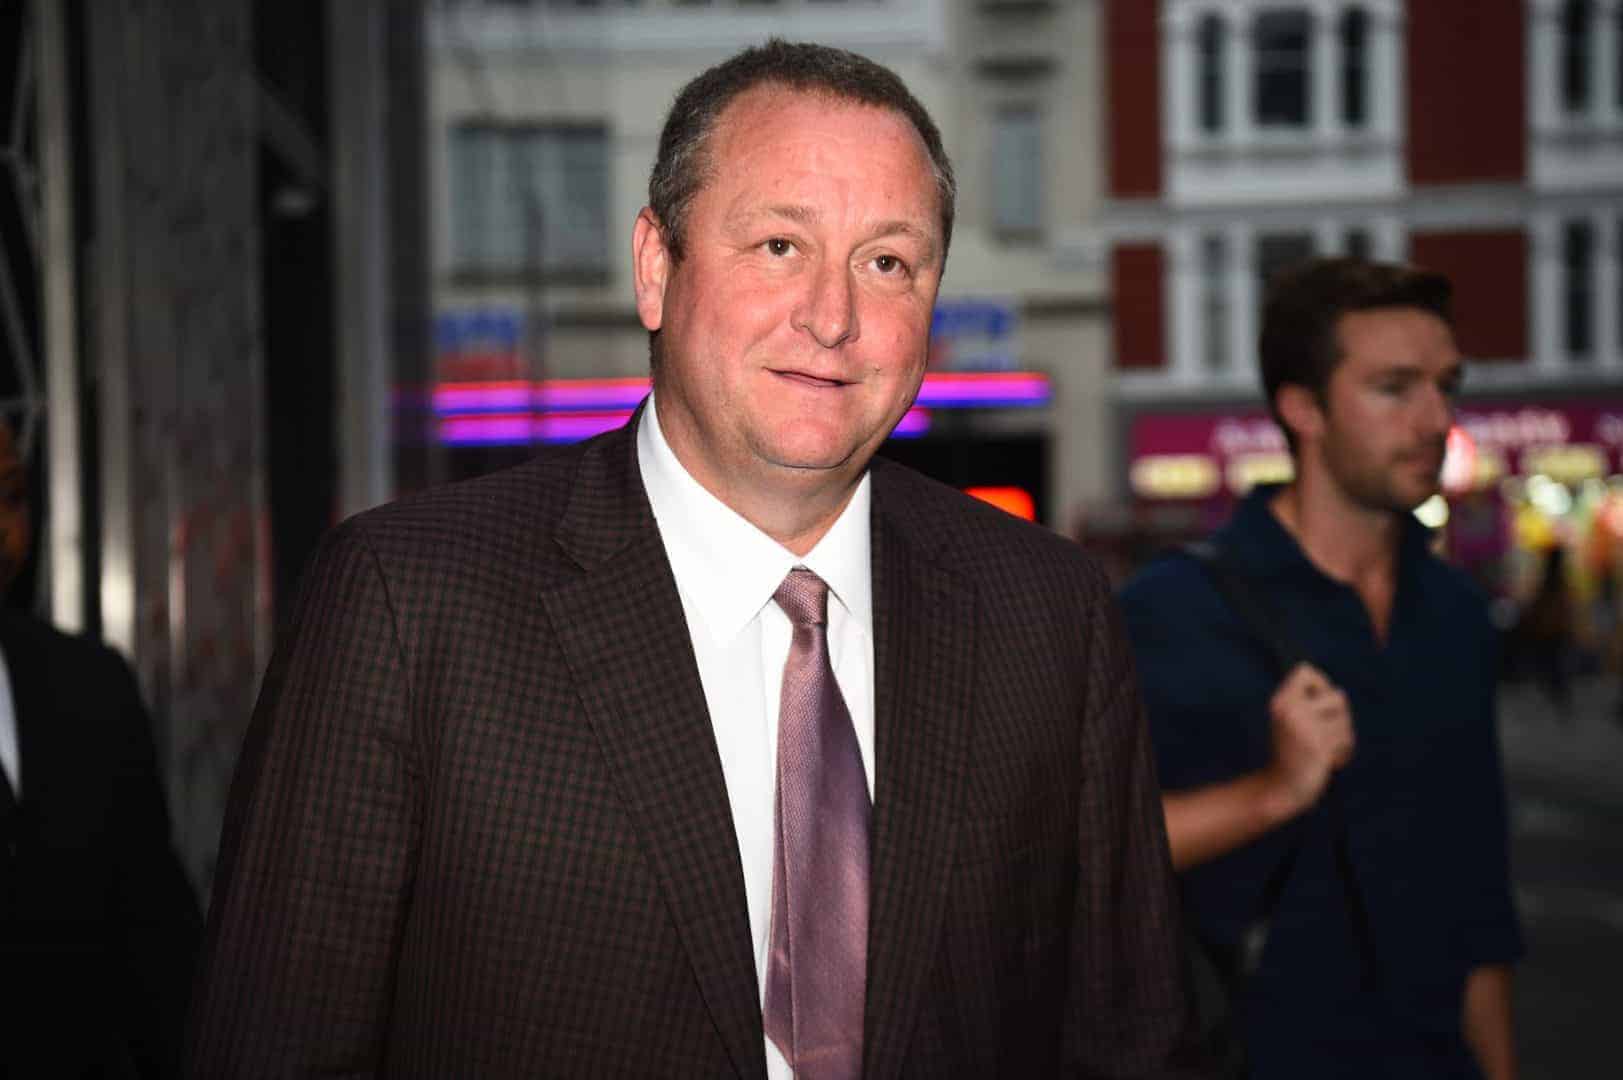 PM warns Mike Ashley to ‘expect the consequences’ if he flouts rules